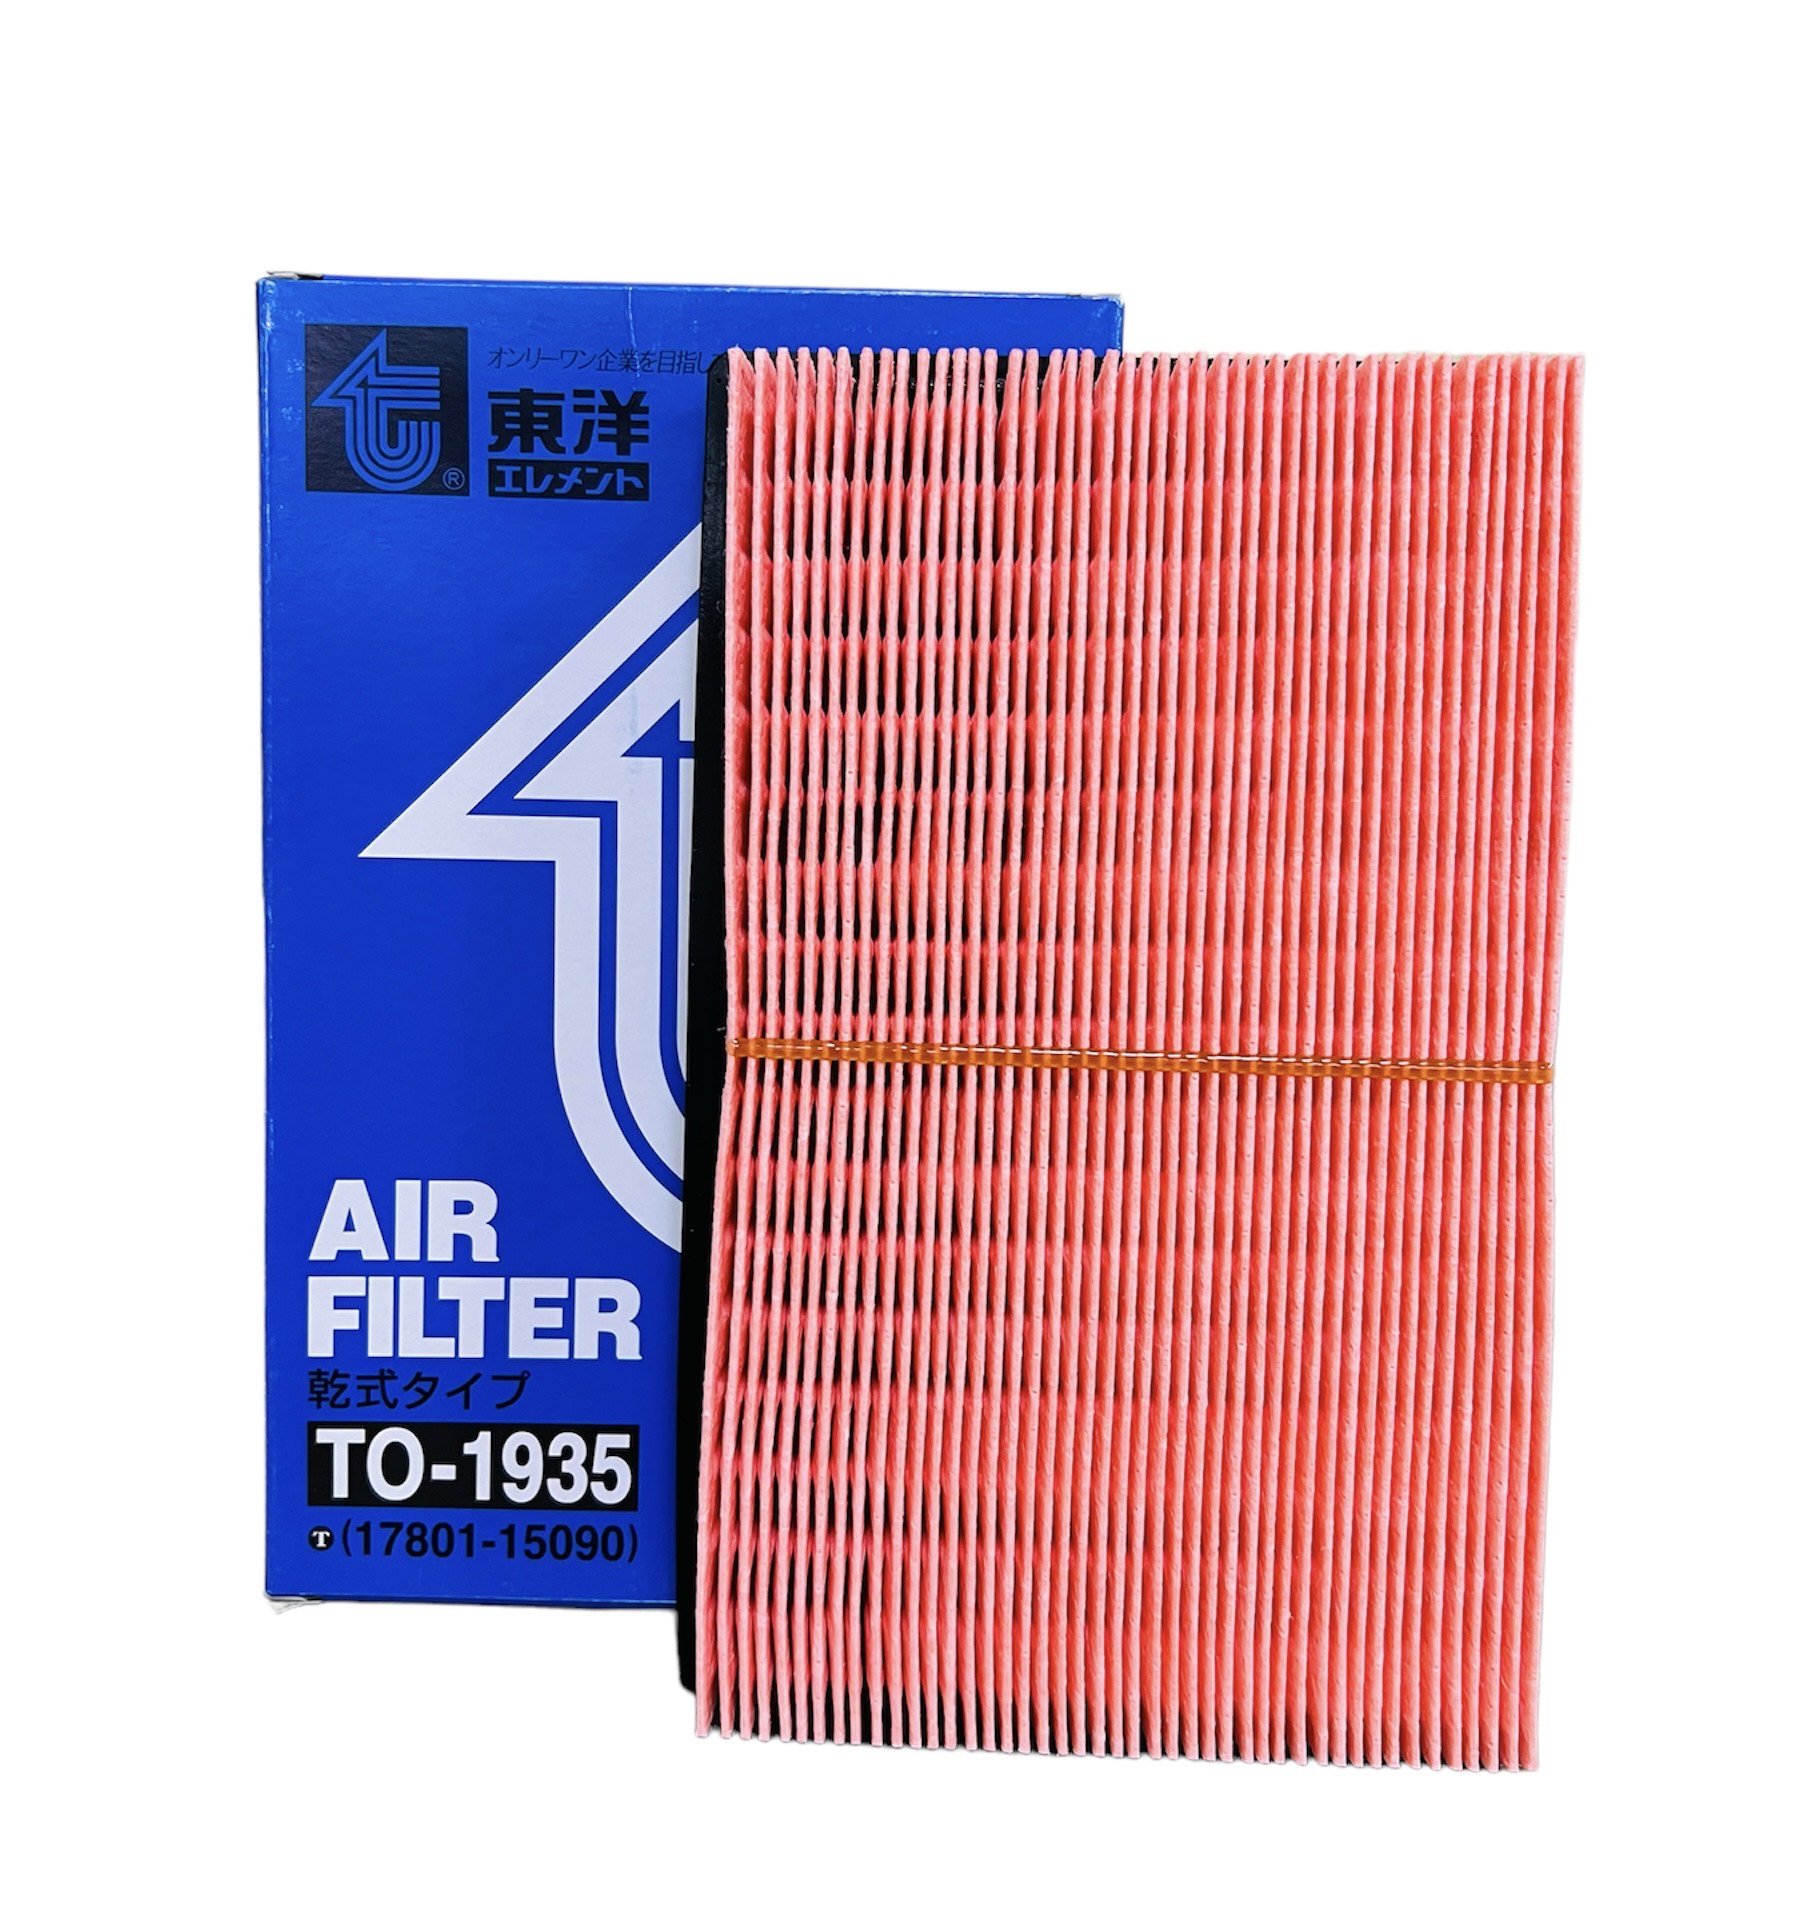 Air Filter TO-1935